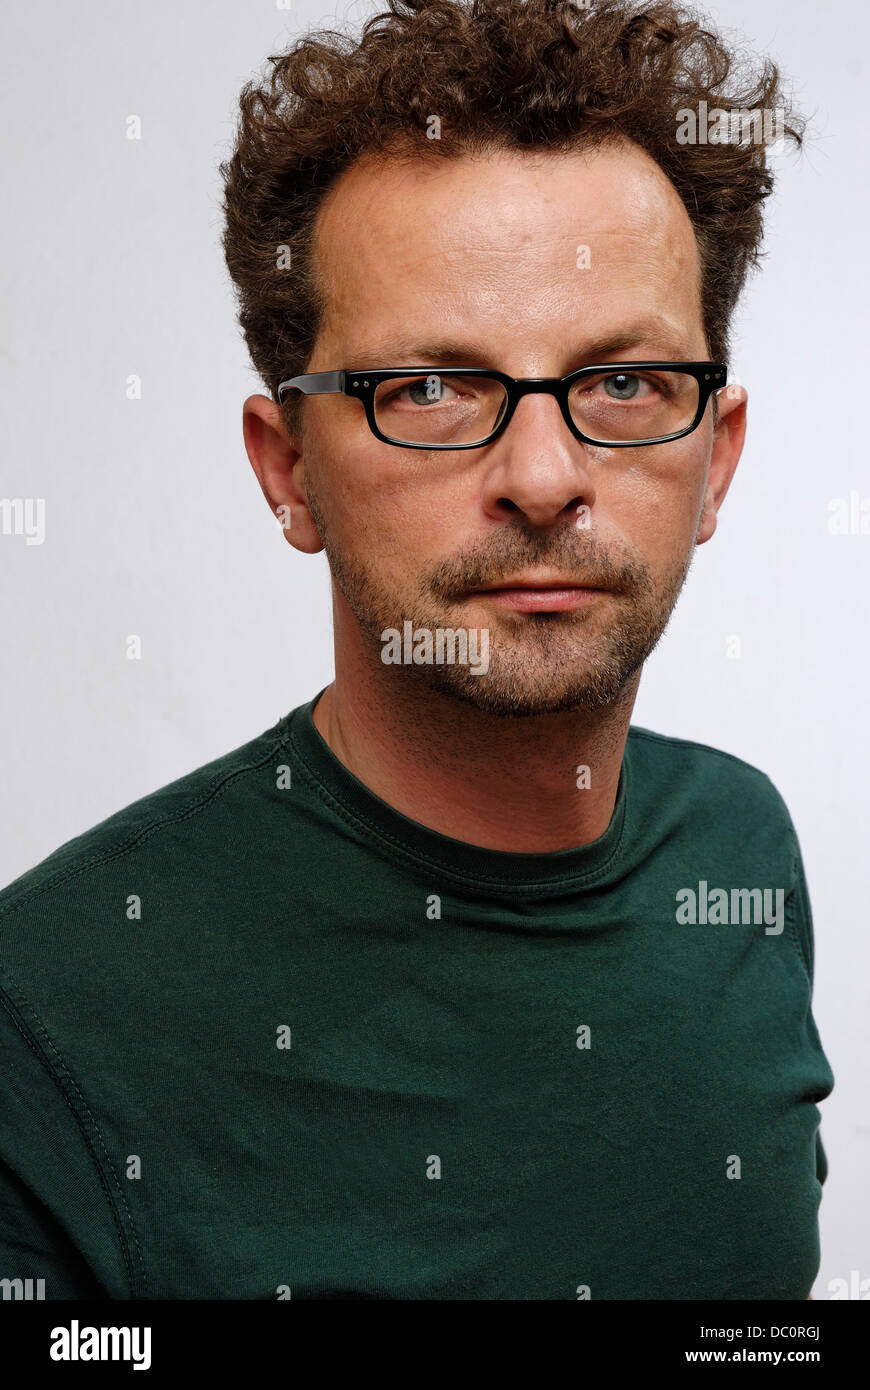 A man with glasses, a green t.shirt and unshaven Stock Photo